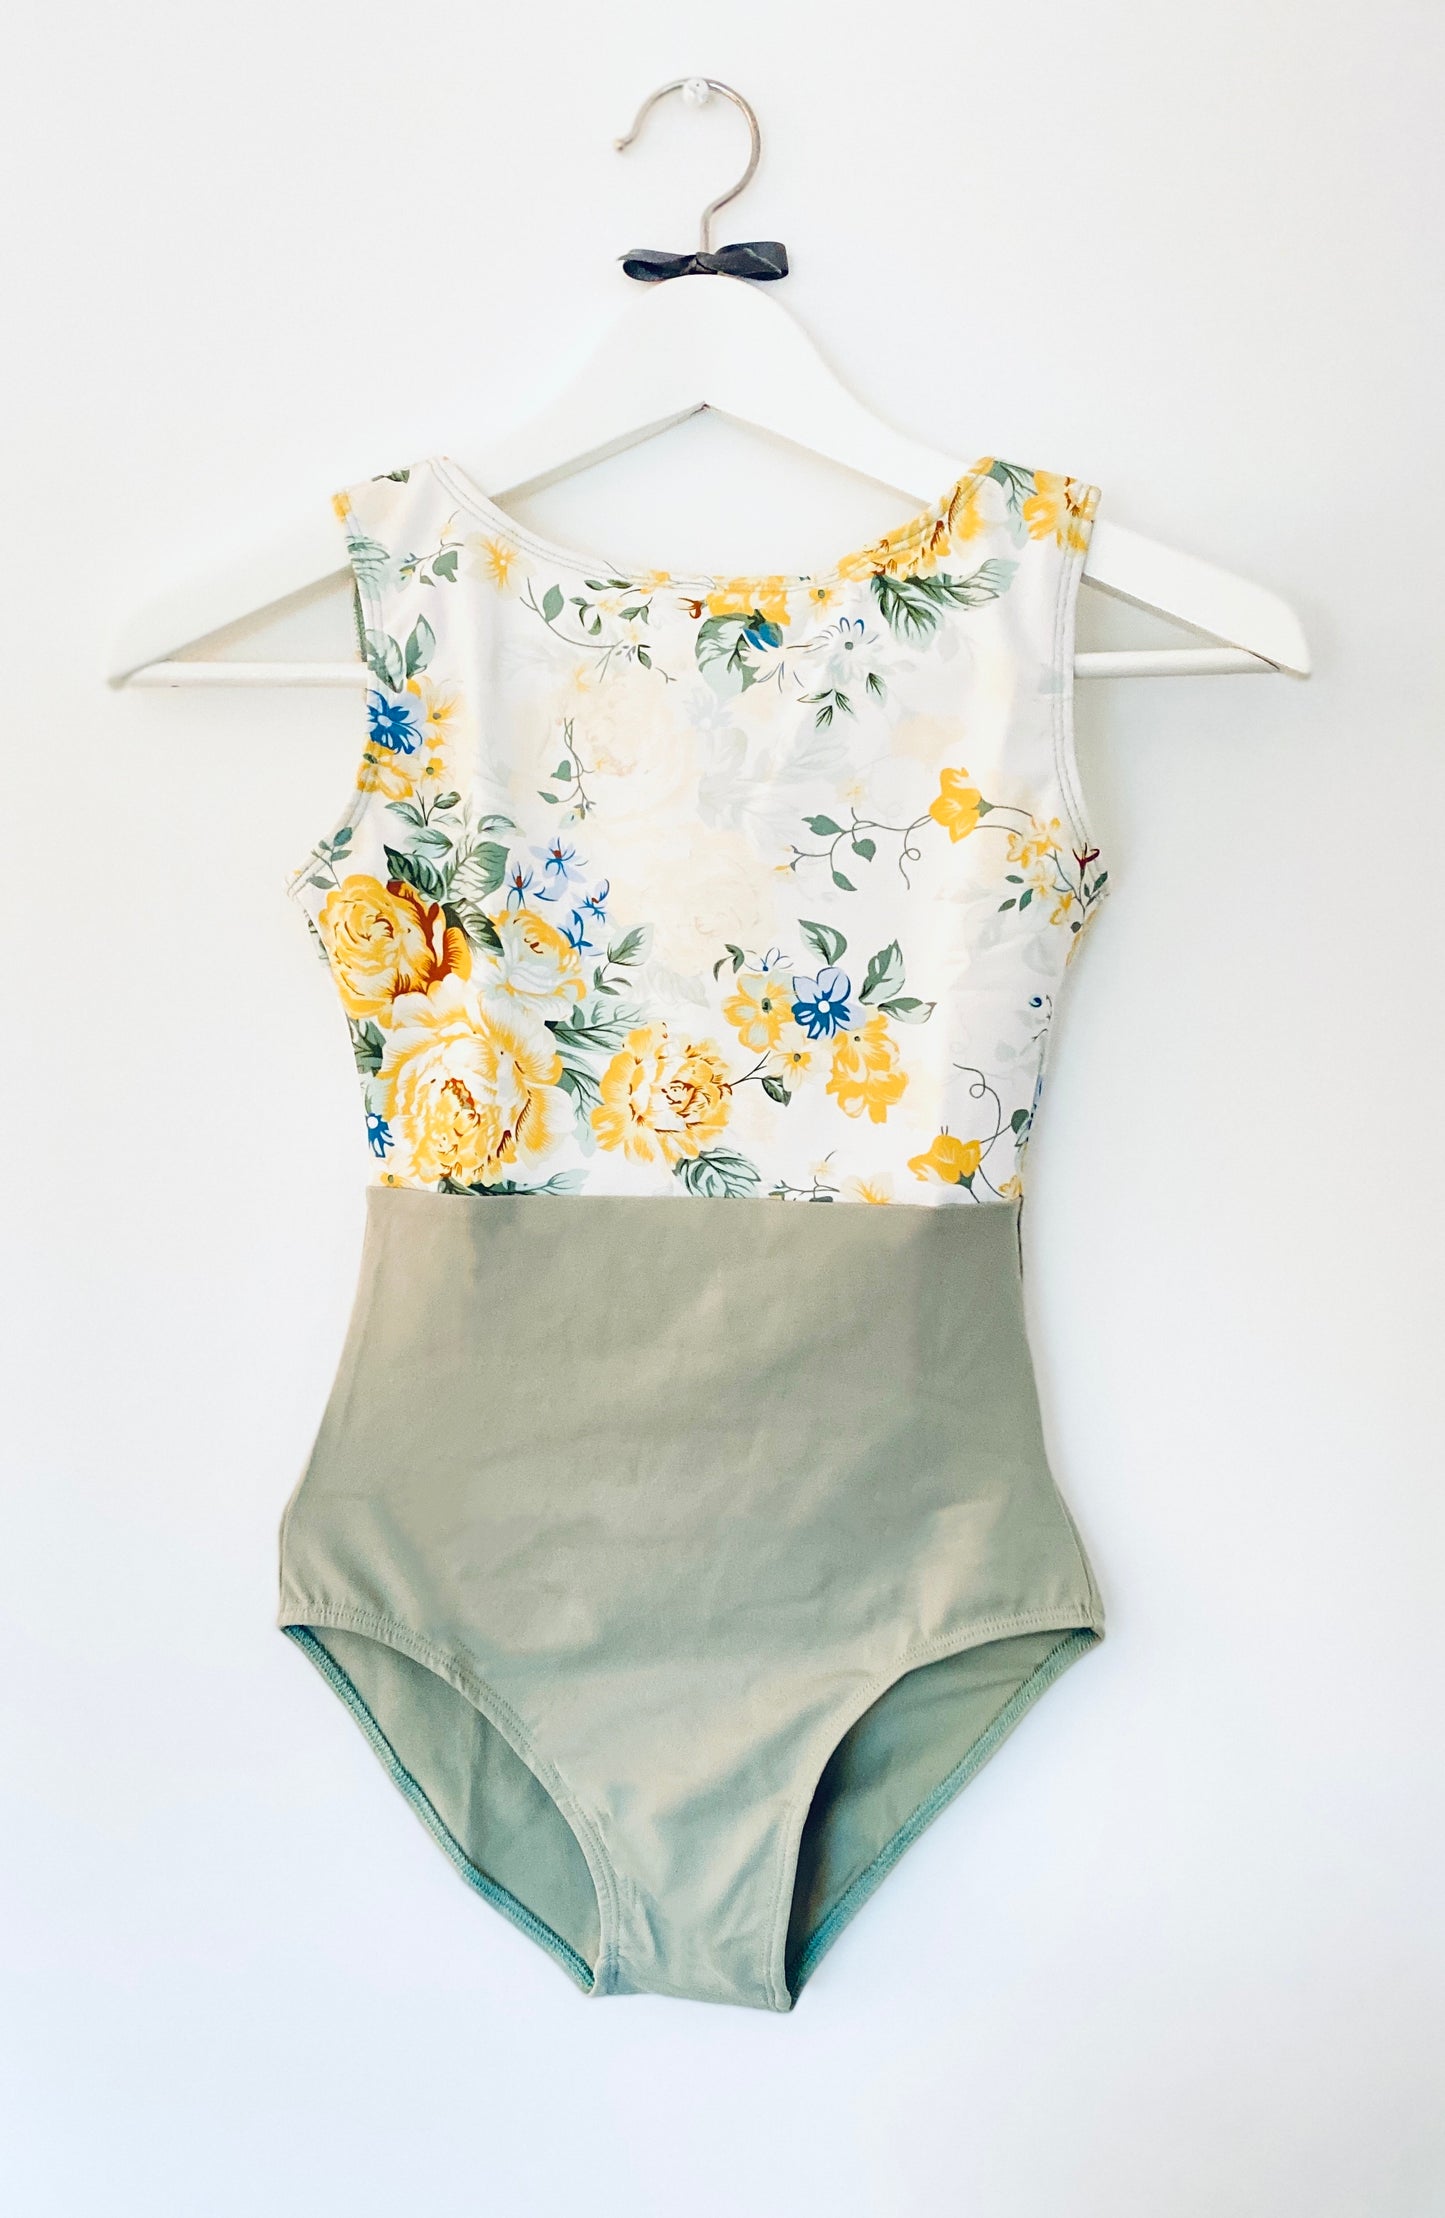 leotard in floral print sage and yellow . Sleeveless tank leotard from The Collective Dancewear